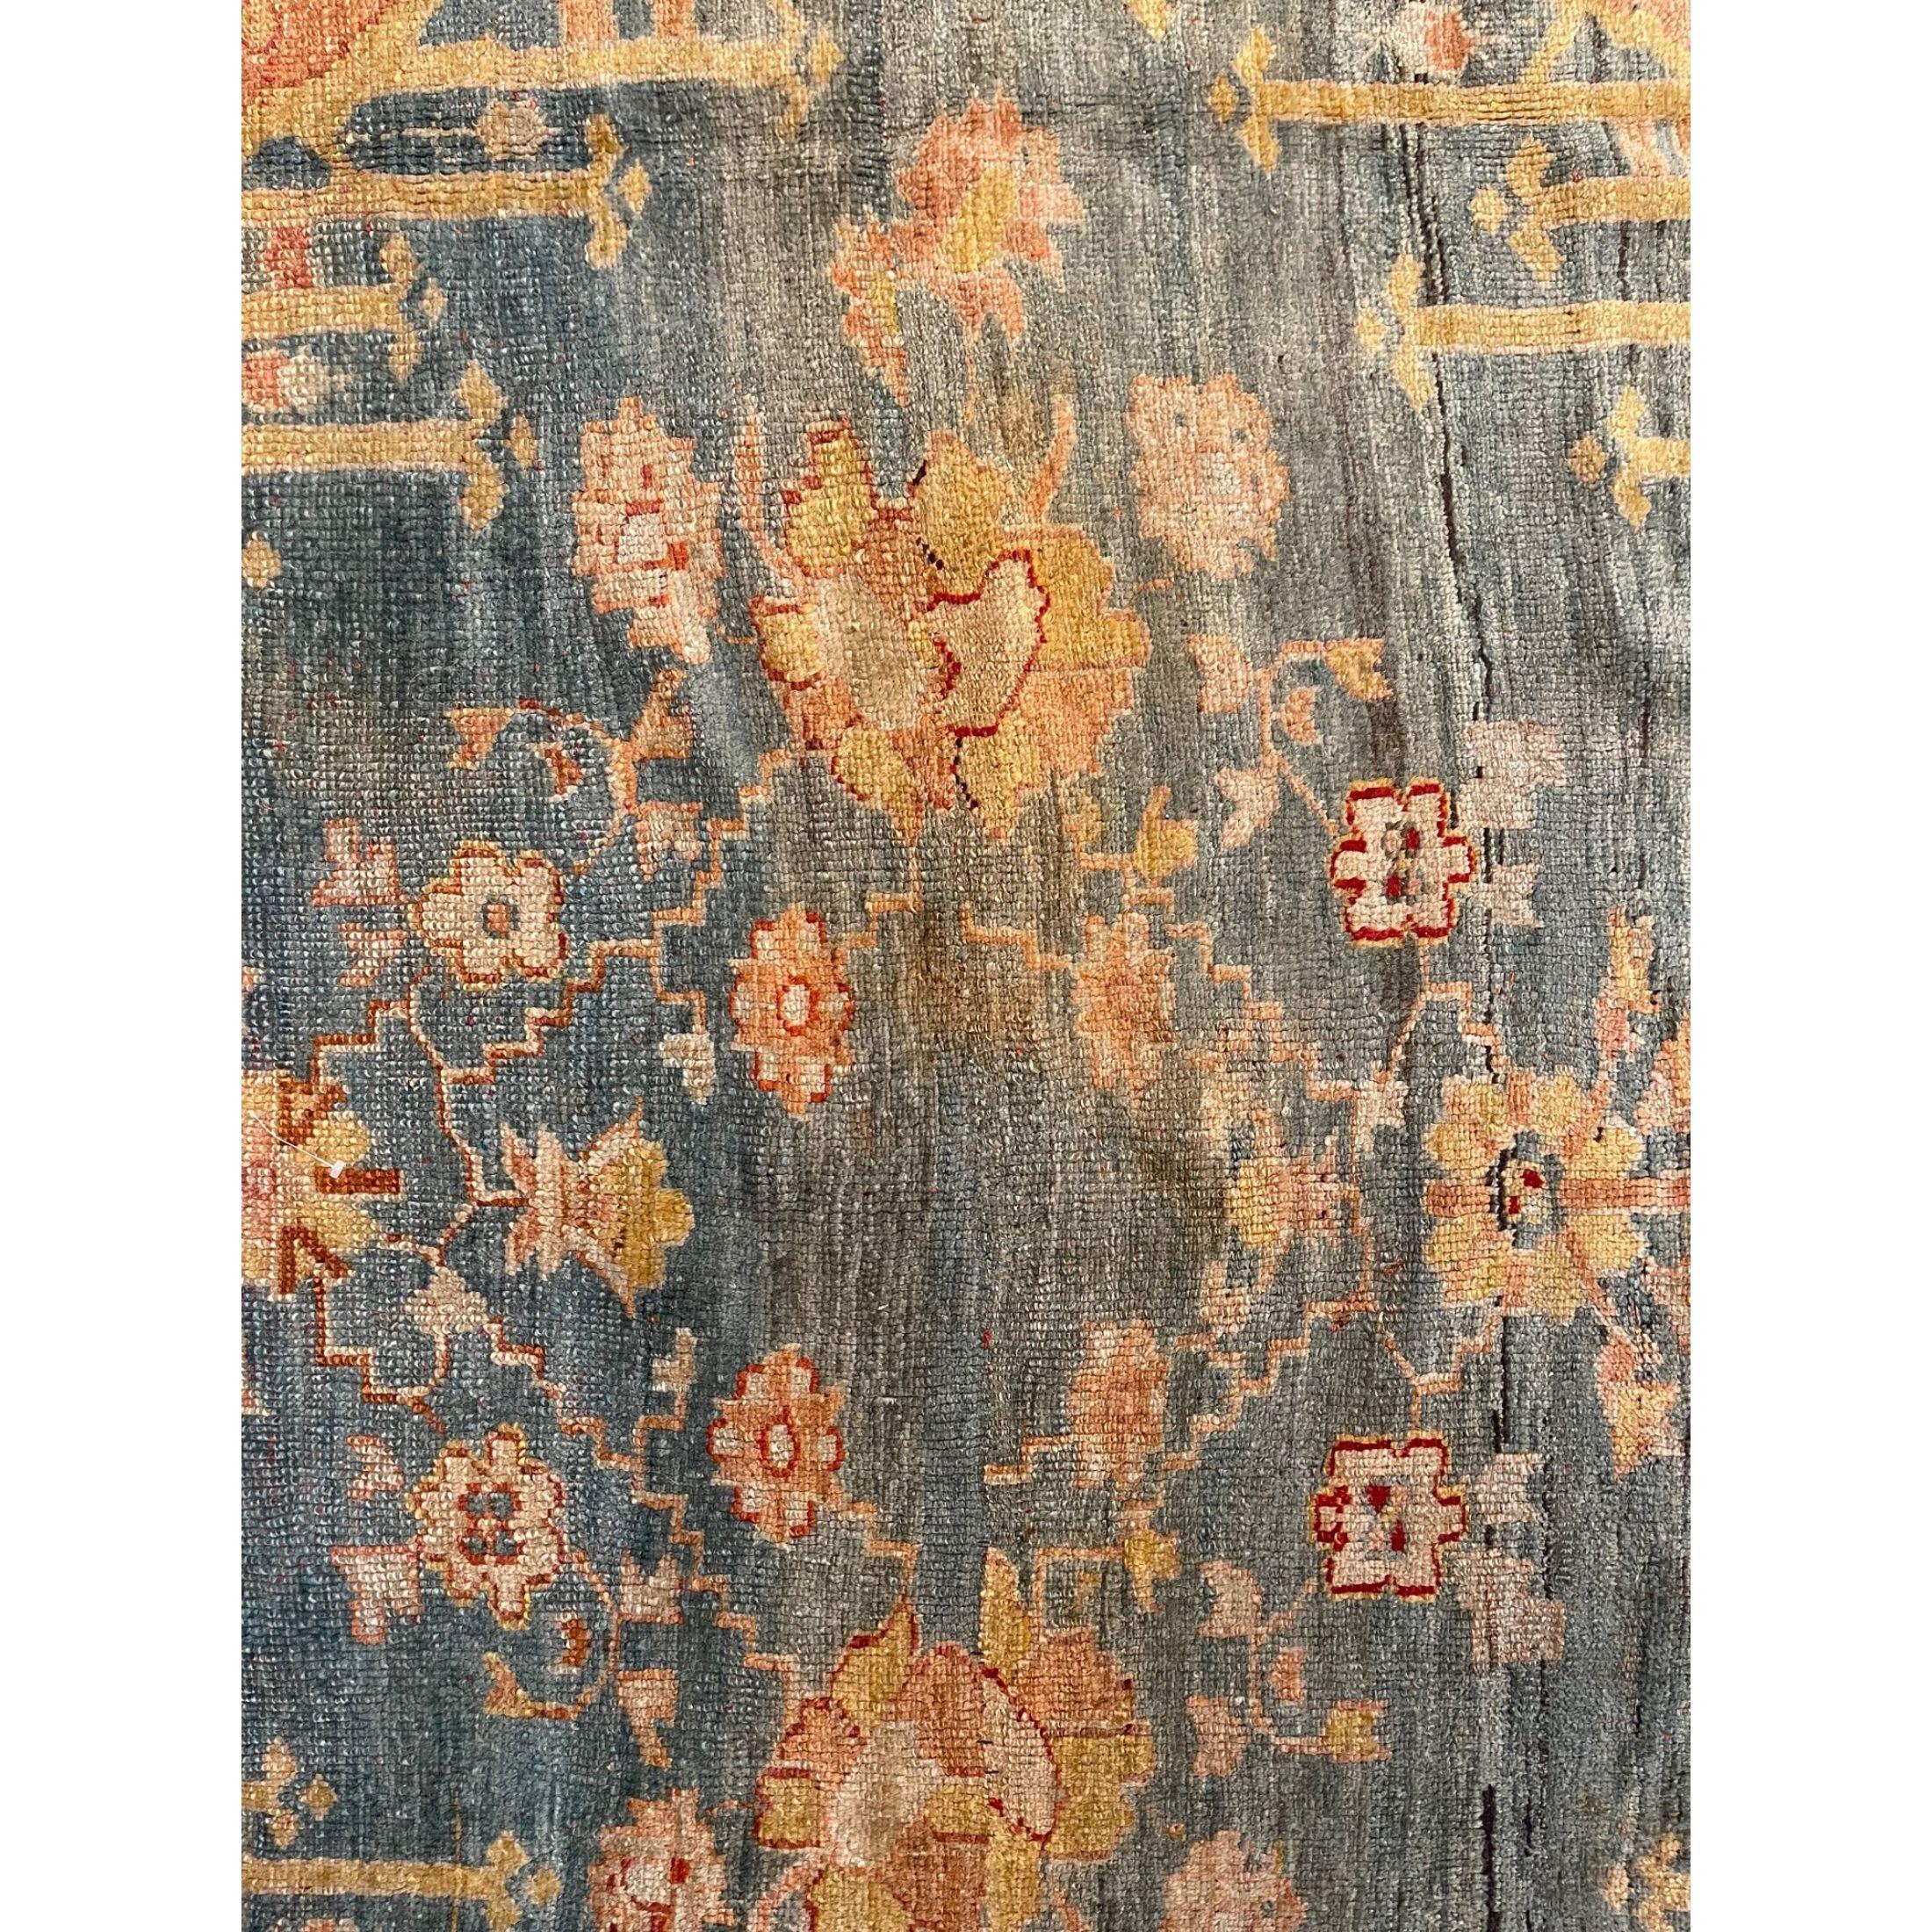 ntique Turkish Oushak rugs have been woven in Western Turkey since the beginning of the Ottoman period. Historians attributed to them many of the great masterpieces of early Turkish carpet weaving from the 15th to the 17th centuries. However, less